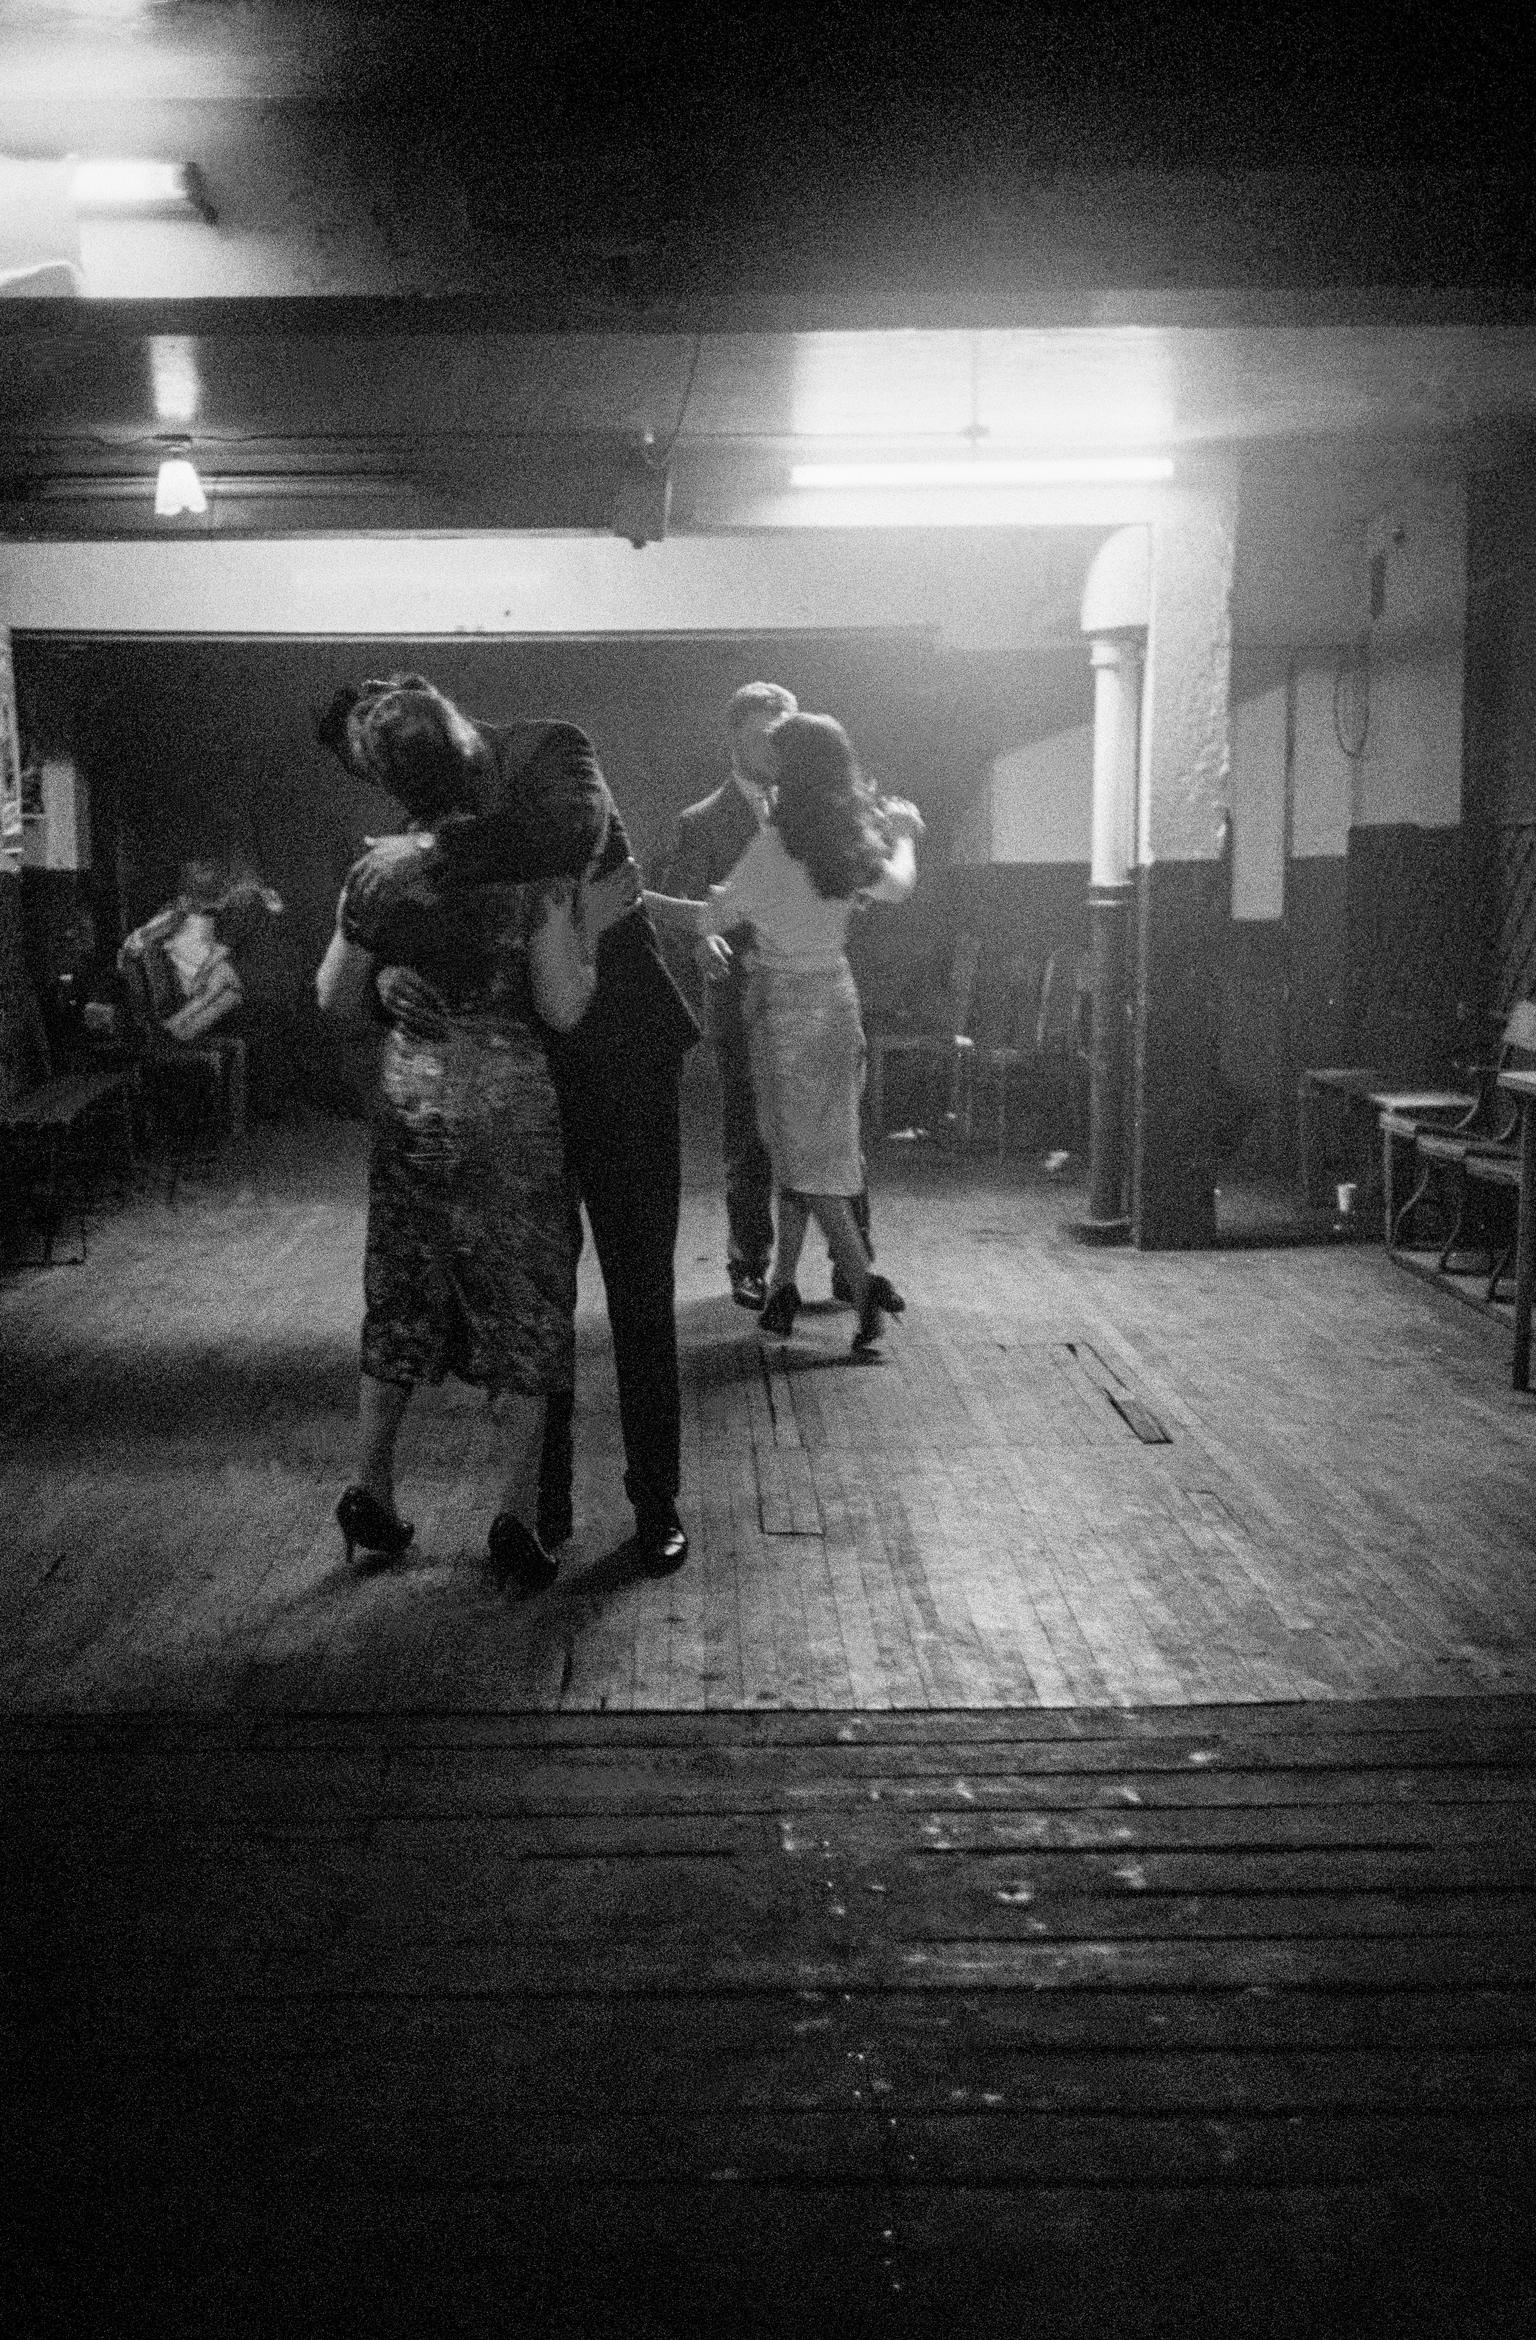 Small dance club. Taken on a Contax 2 camera (first professional camera). London